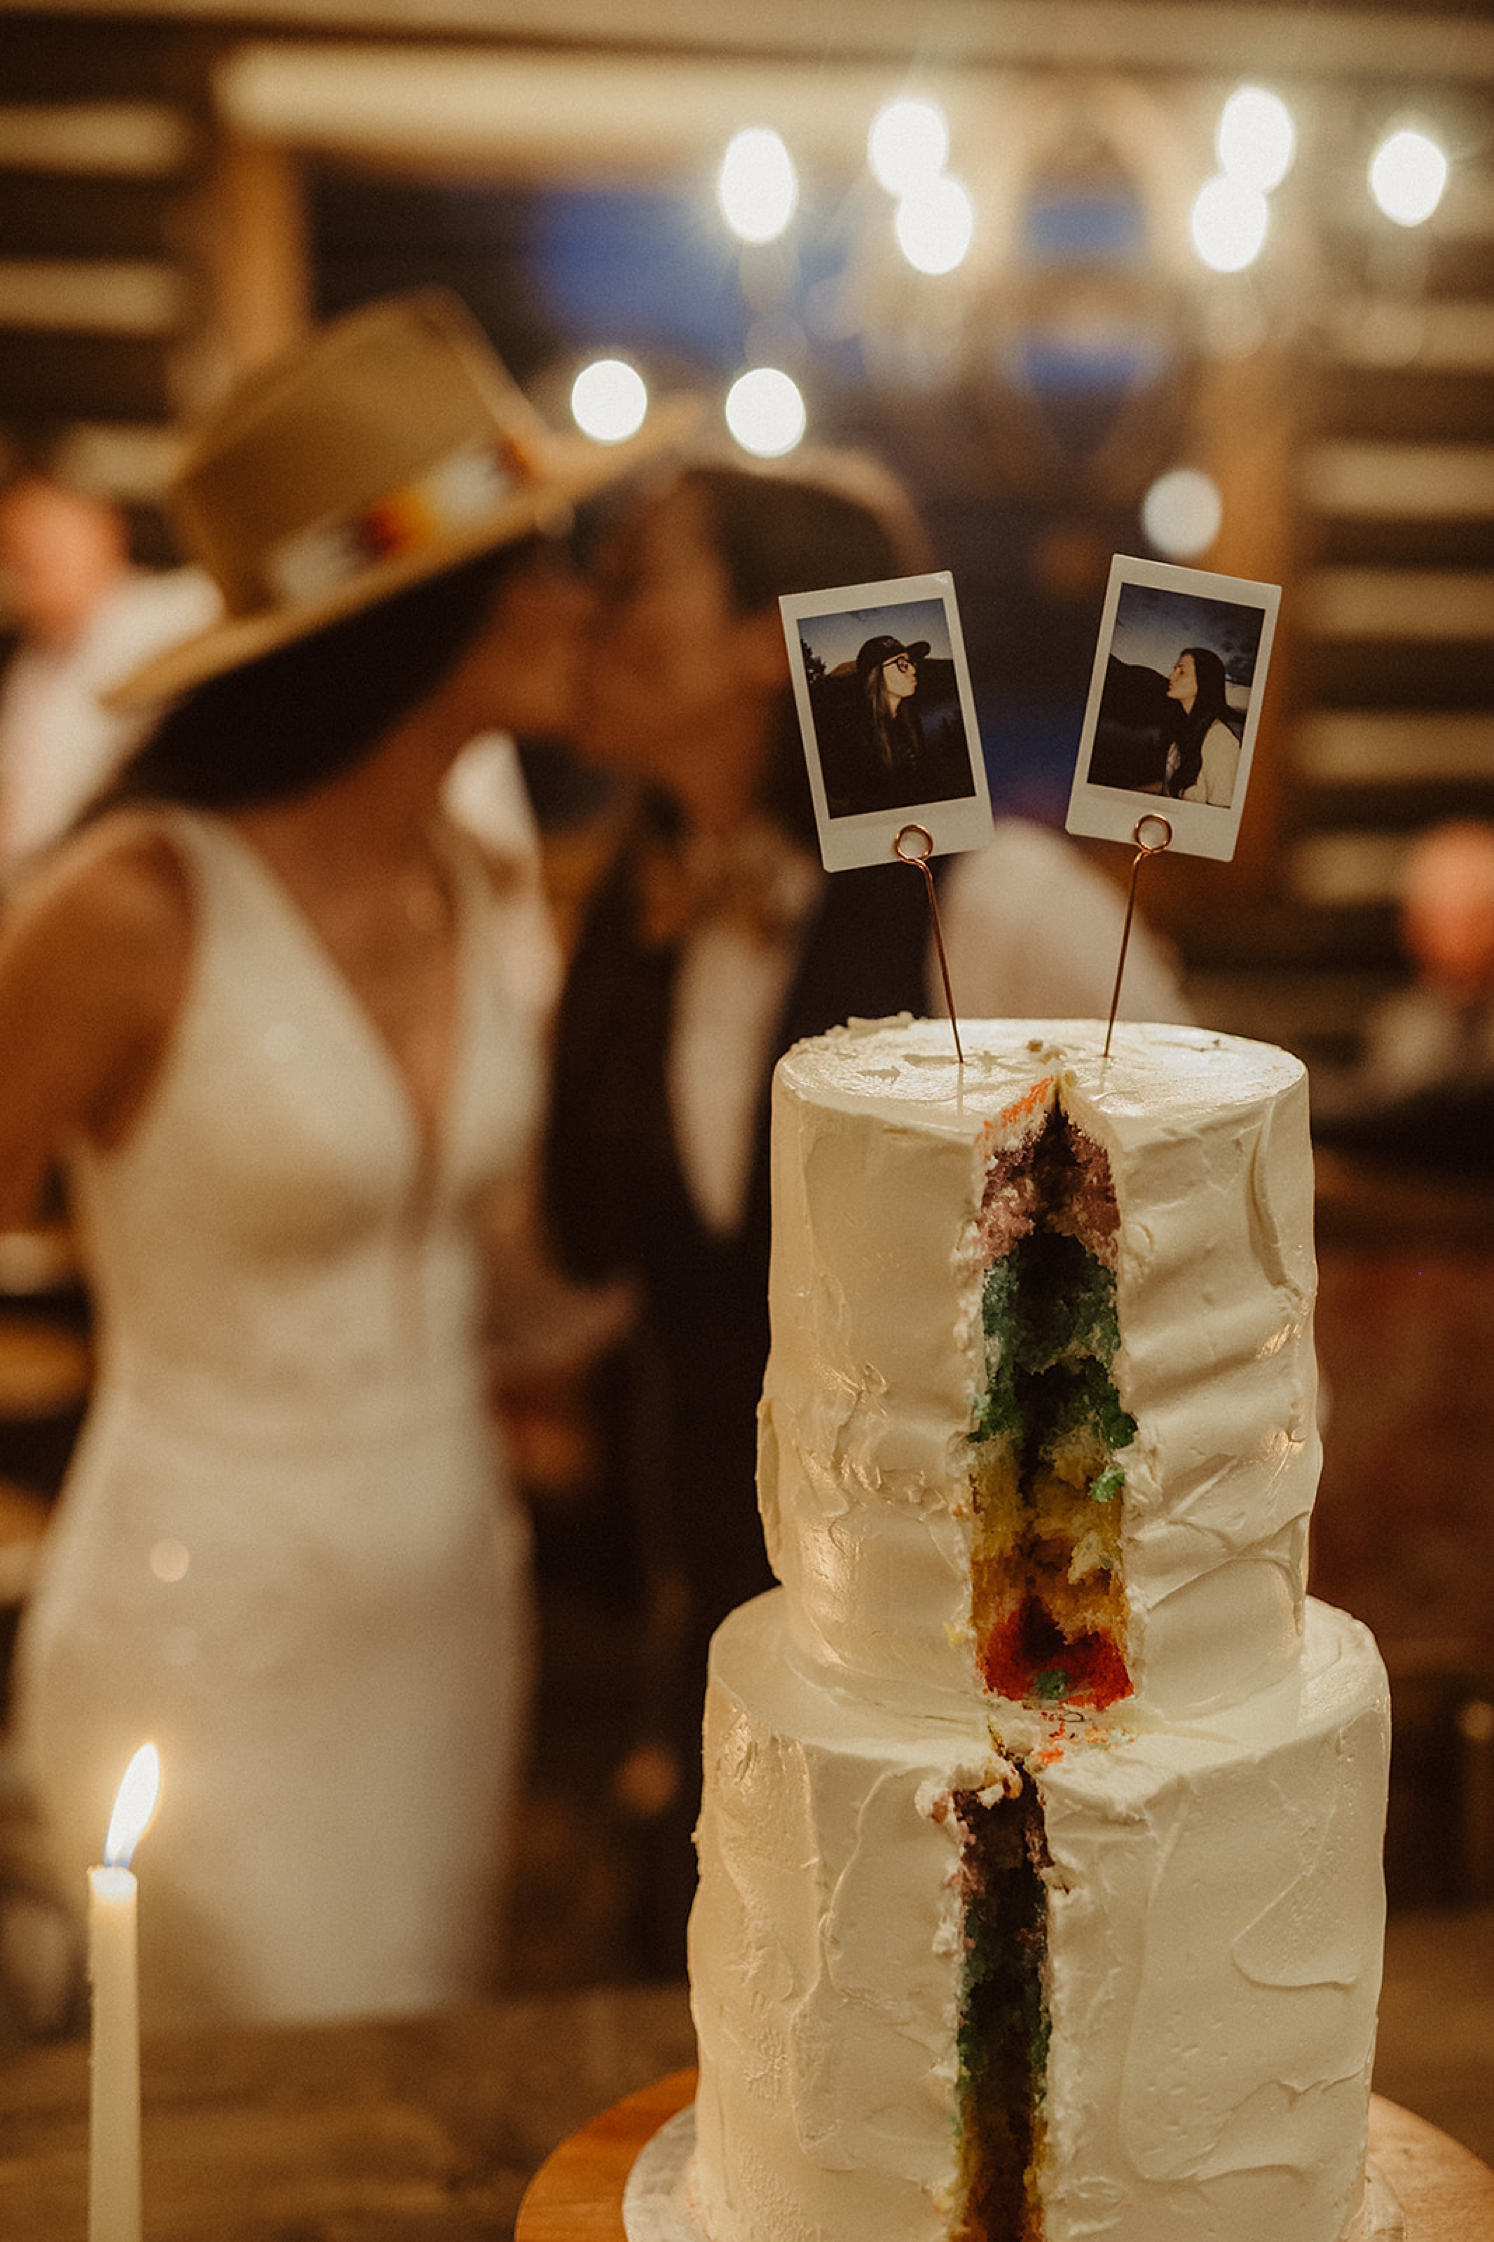 Rainbow wedding cake with partners kissing in the background at Colorado Airbnb wedding | McArthur Weddings and Events